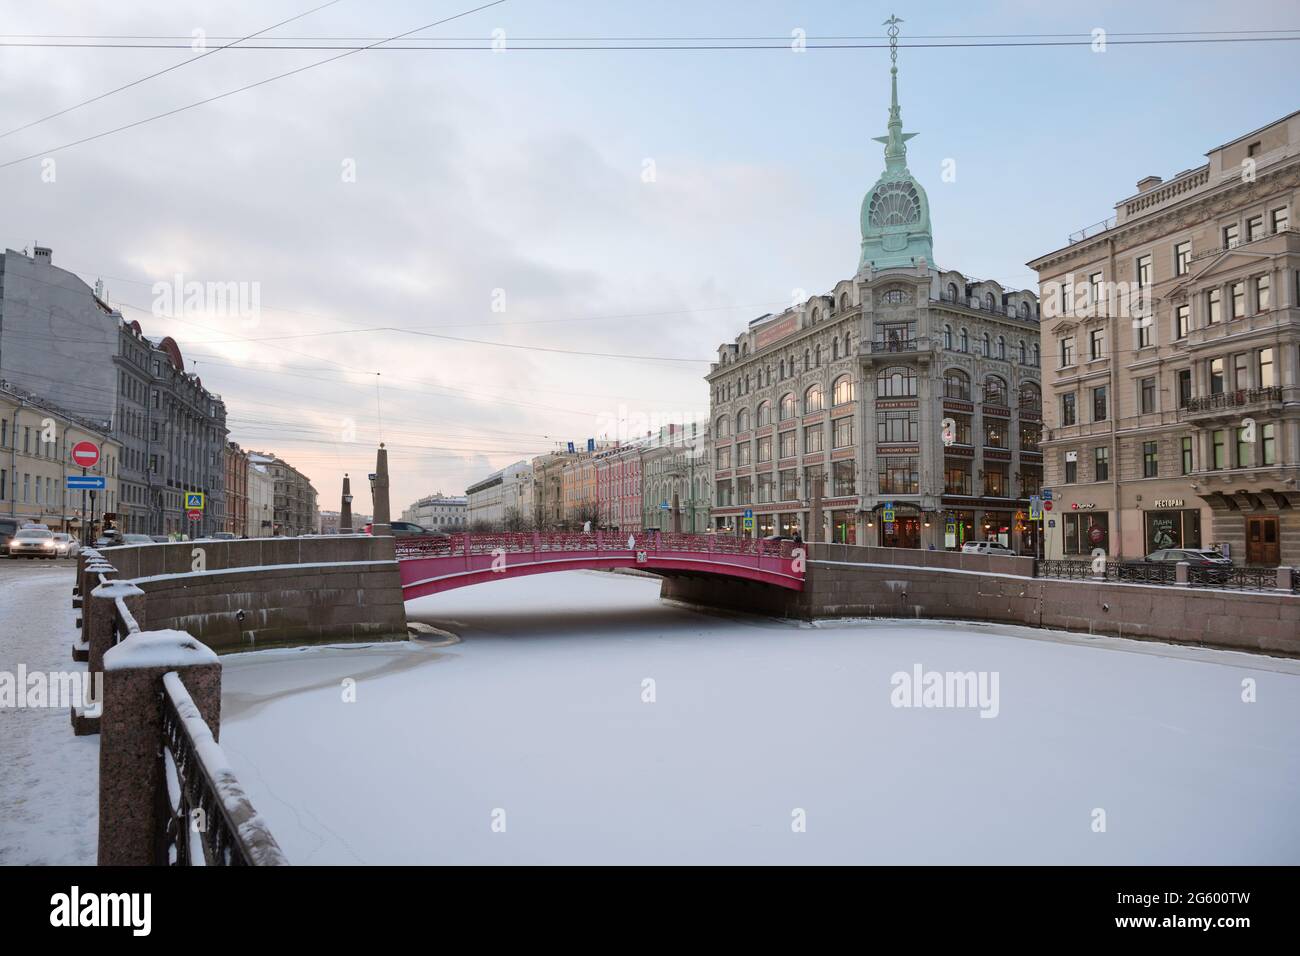 St. Petersburg, Russia, 16th January, 2021: Red Bridge across frozen river Moika with the art nouveau building of shopping centre At The Red Bridge, Red Bridge was built in 1808-1813 by design of William Heste, and the building of shopping centre was erected in 1906-1907 for the clothing store of Stefan Esders and Charles Scheefhals by design of architects Vladimir Lipsly and Konstantin de Rochefort Stock Photo